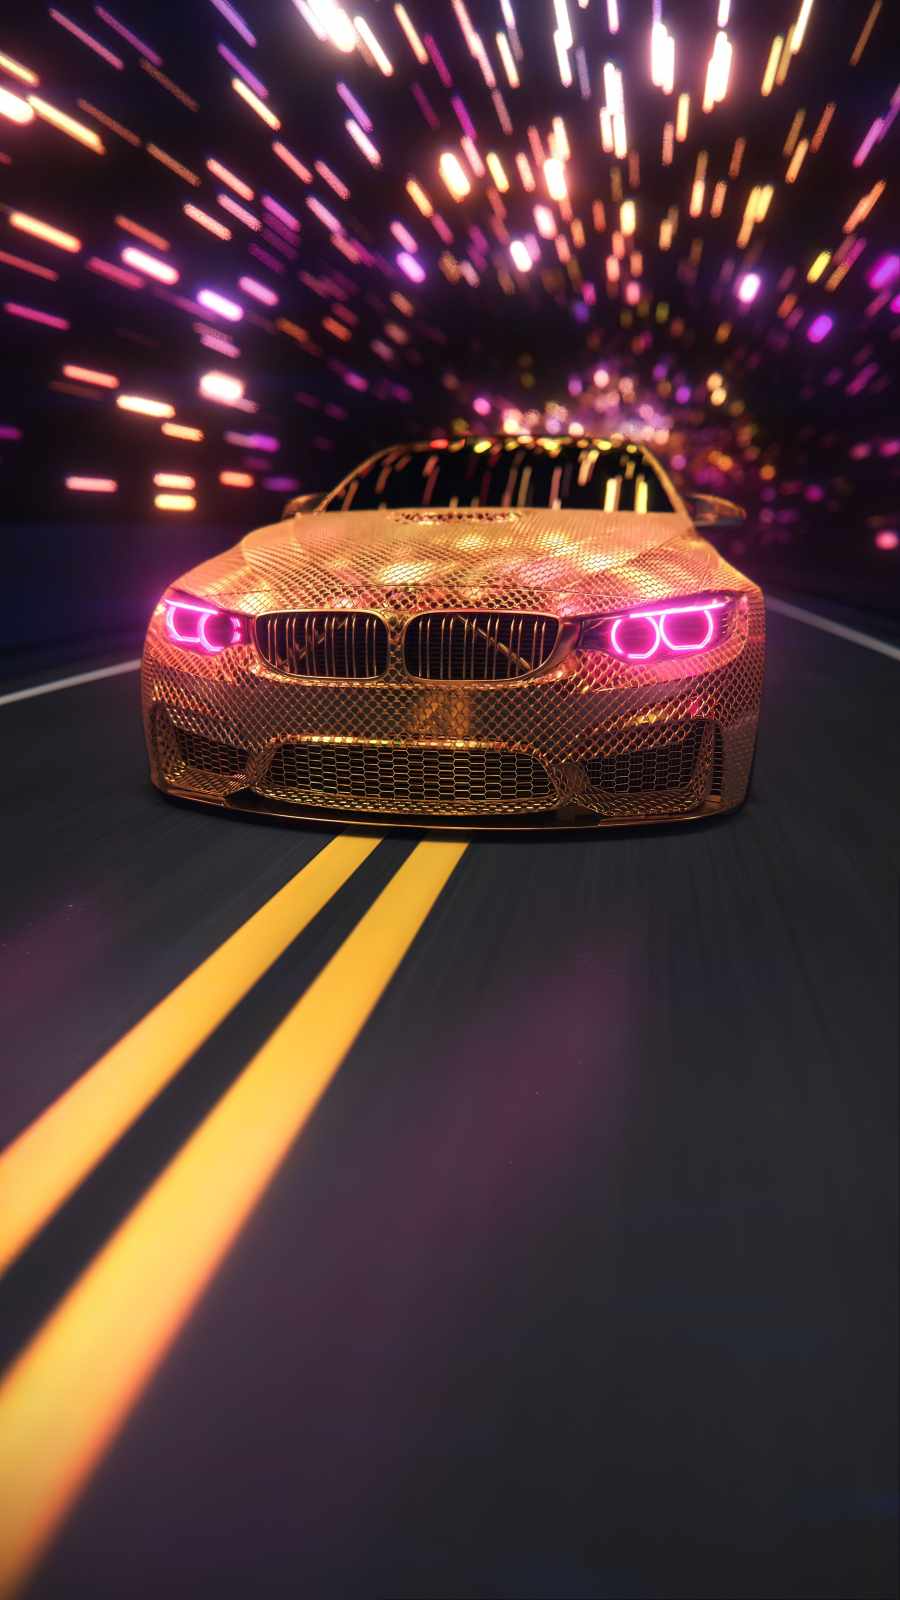 BMW Car Gold IPhone Wallpaper  IPhone Wallpapers